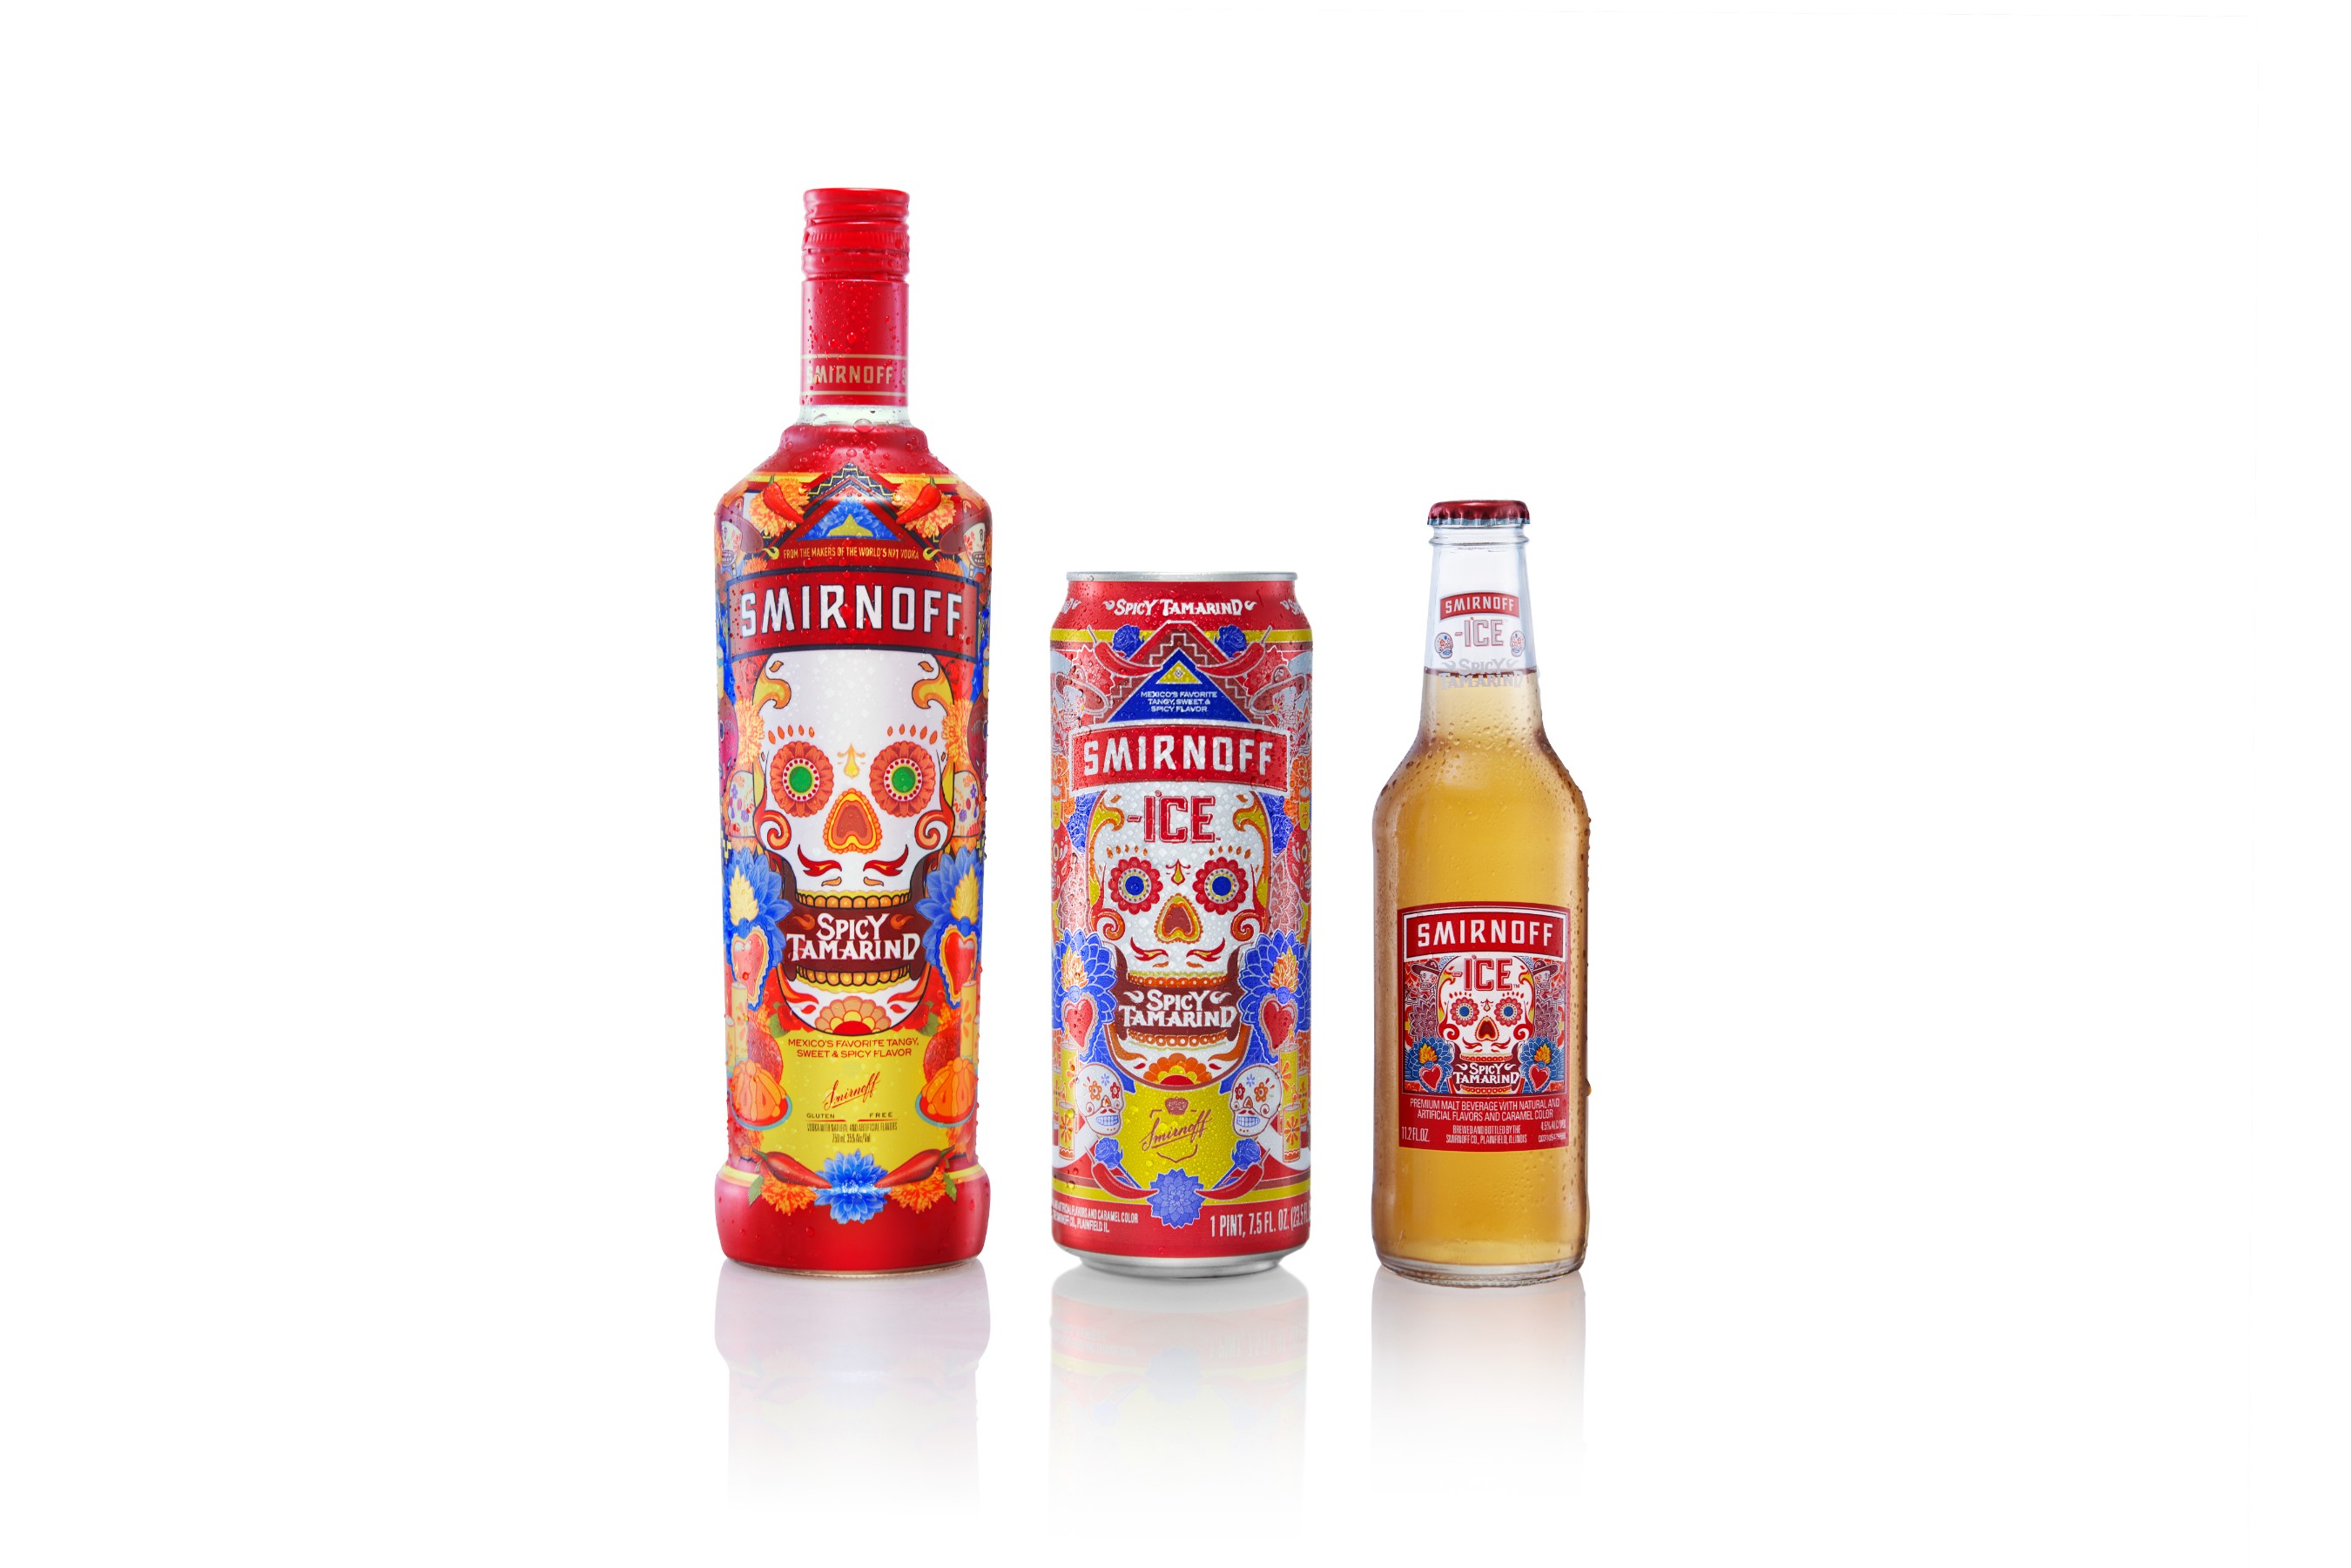 The new spots starring Karol G showcase the Smirnoff Spicy Tamarind boutique of products across spirits and flavored malt beverages.